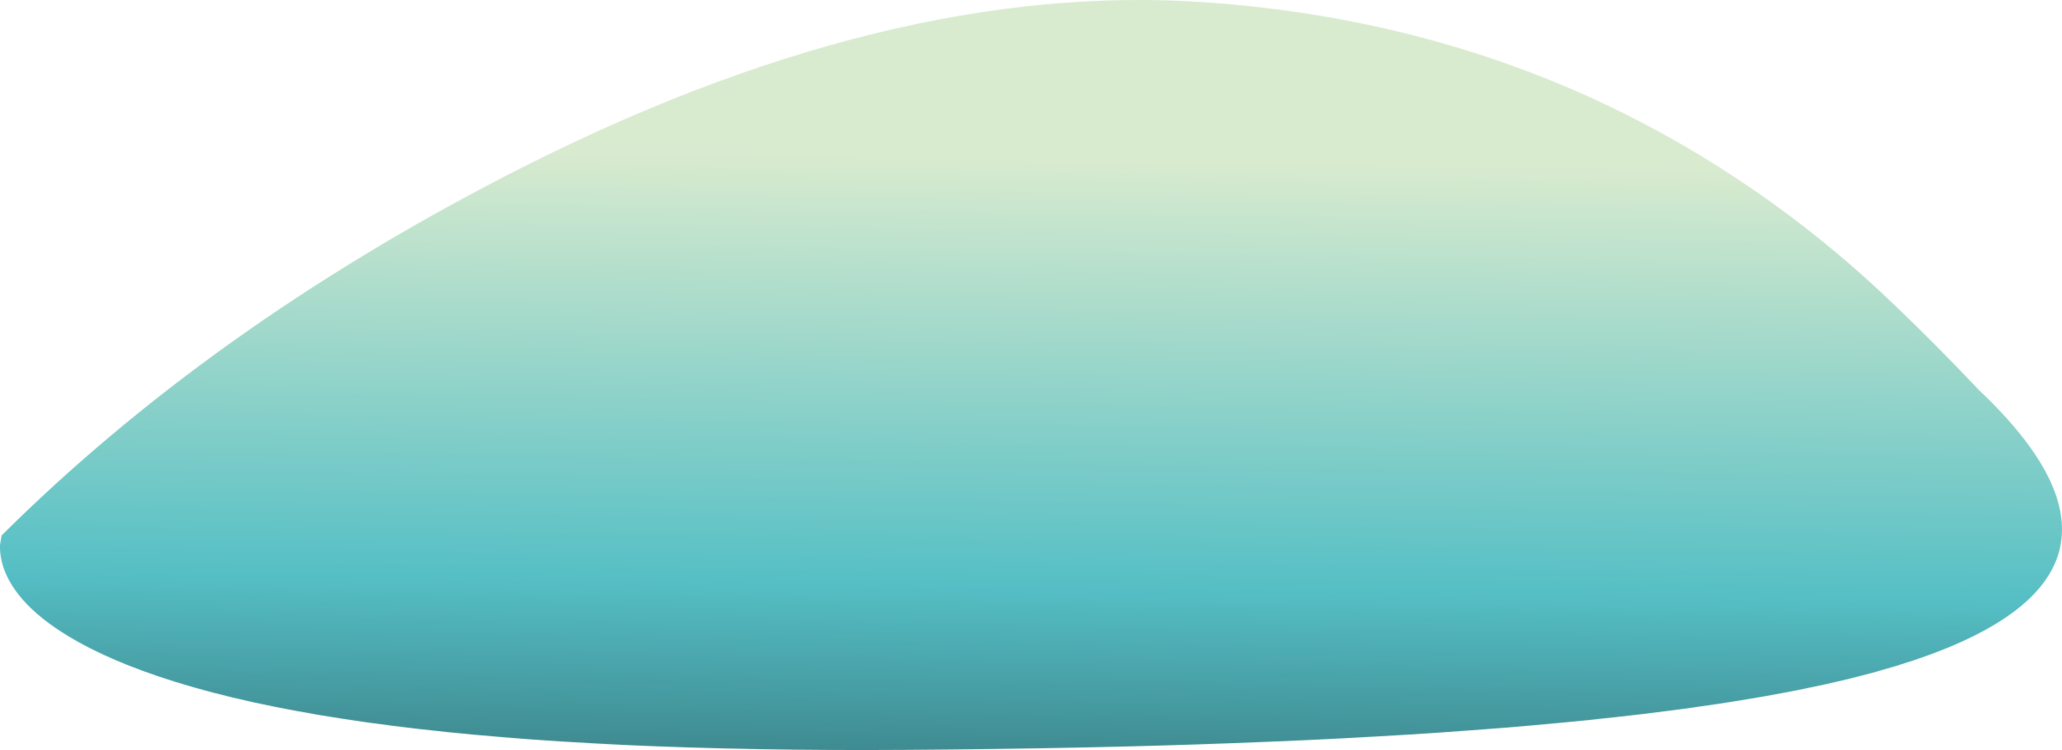 Turquoise,Angle,Sphere